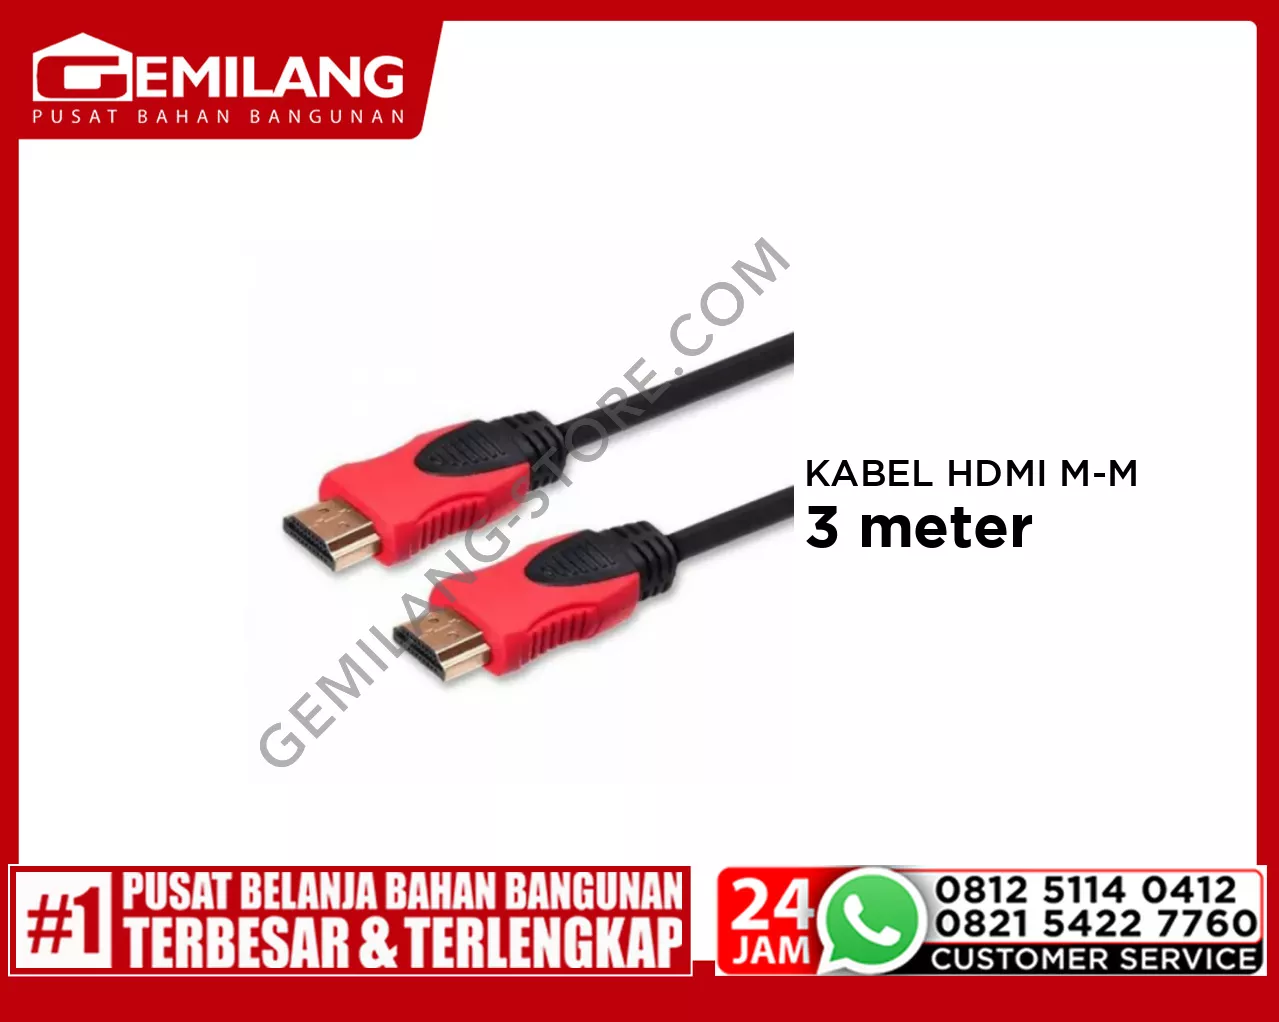 BRAID KABEL HDMI MALE TO MALE RED 3mtr